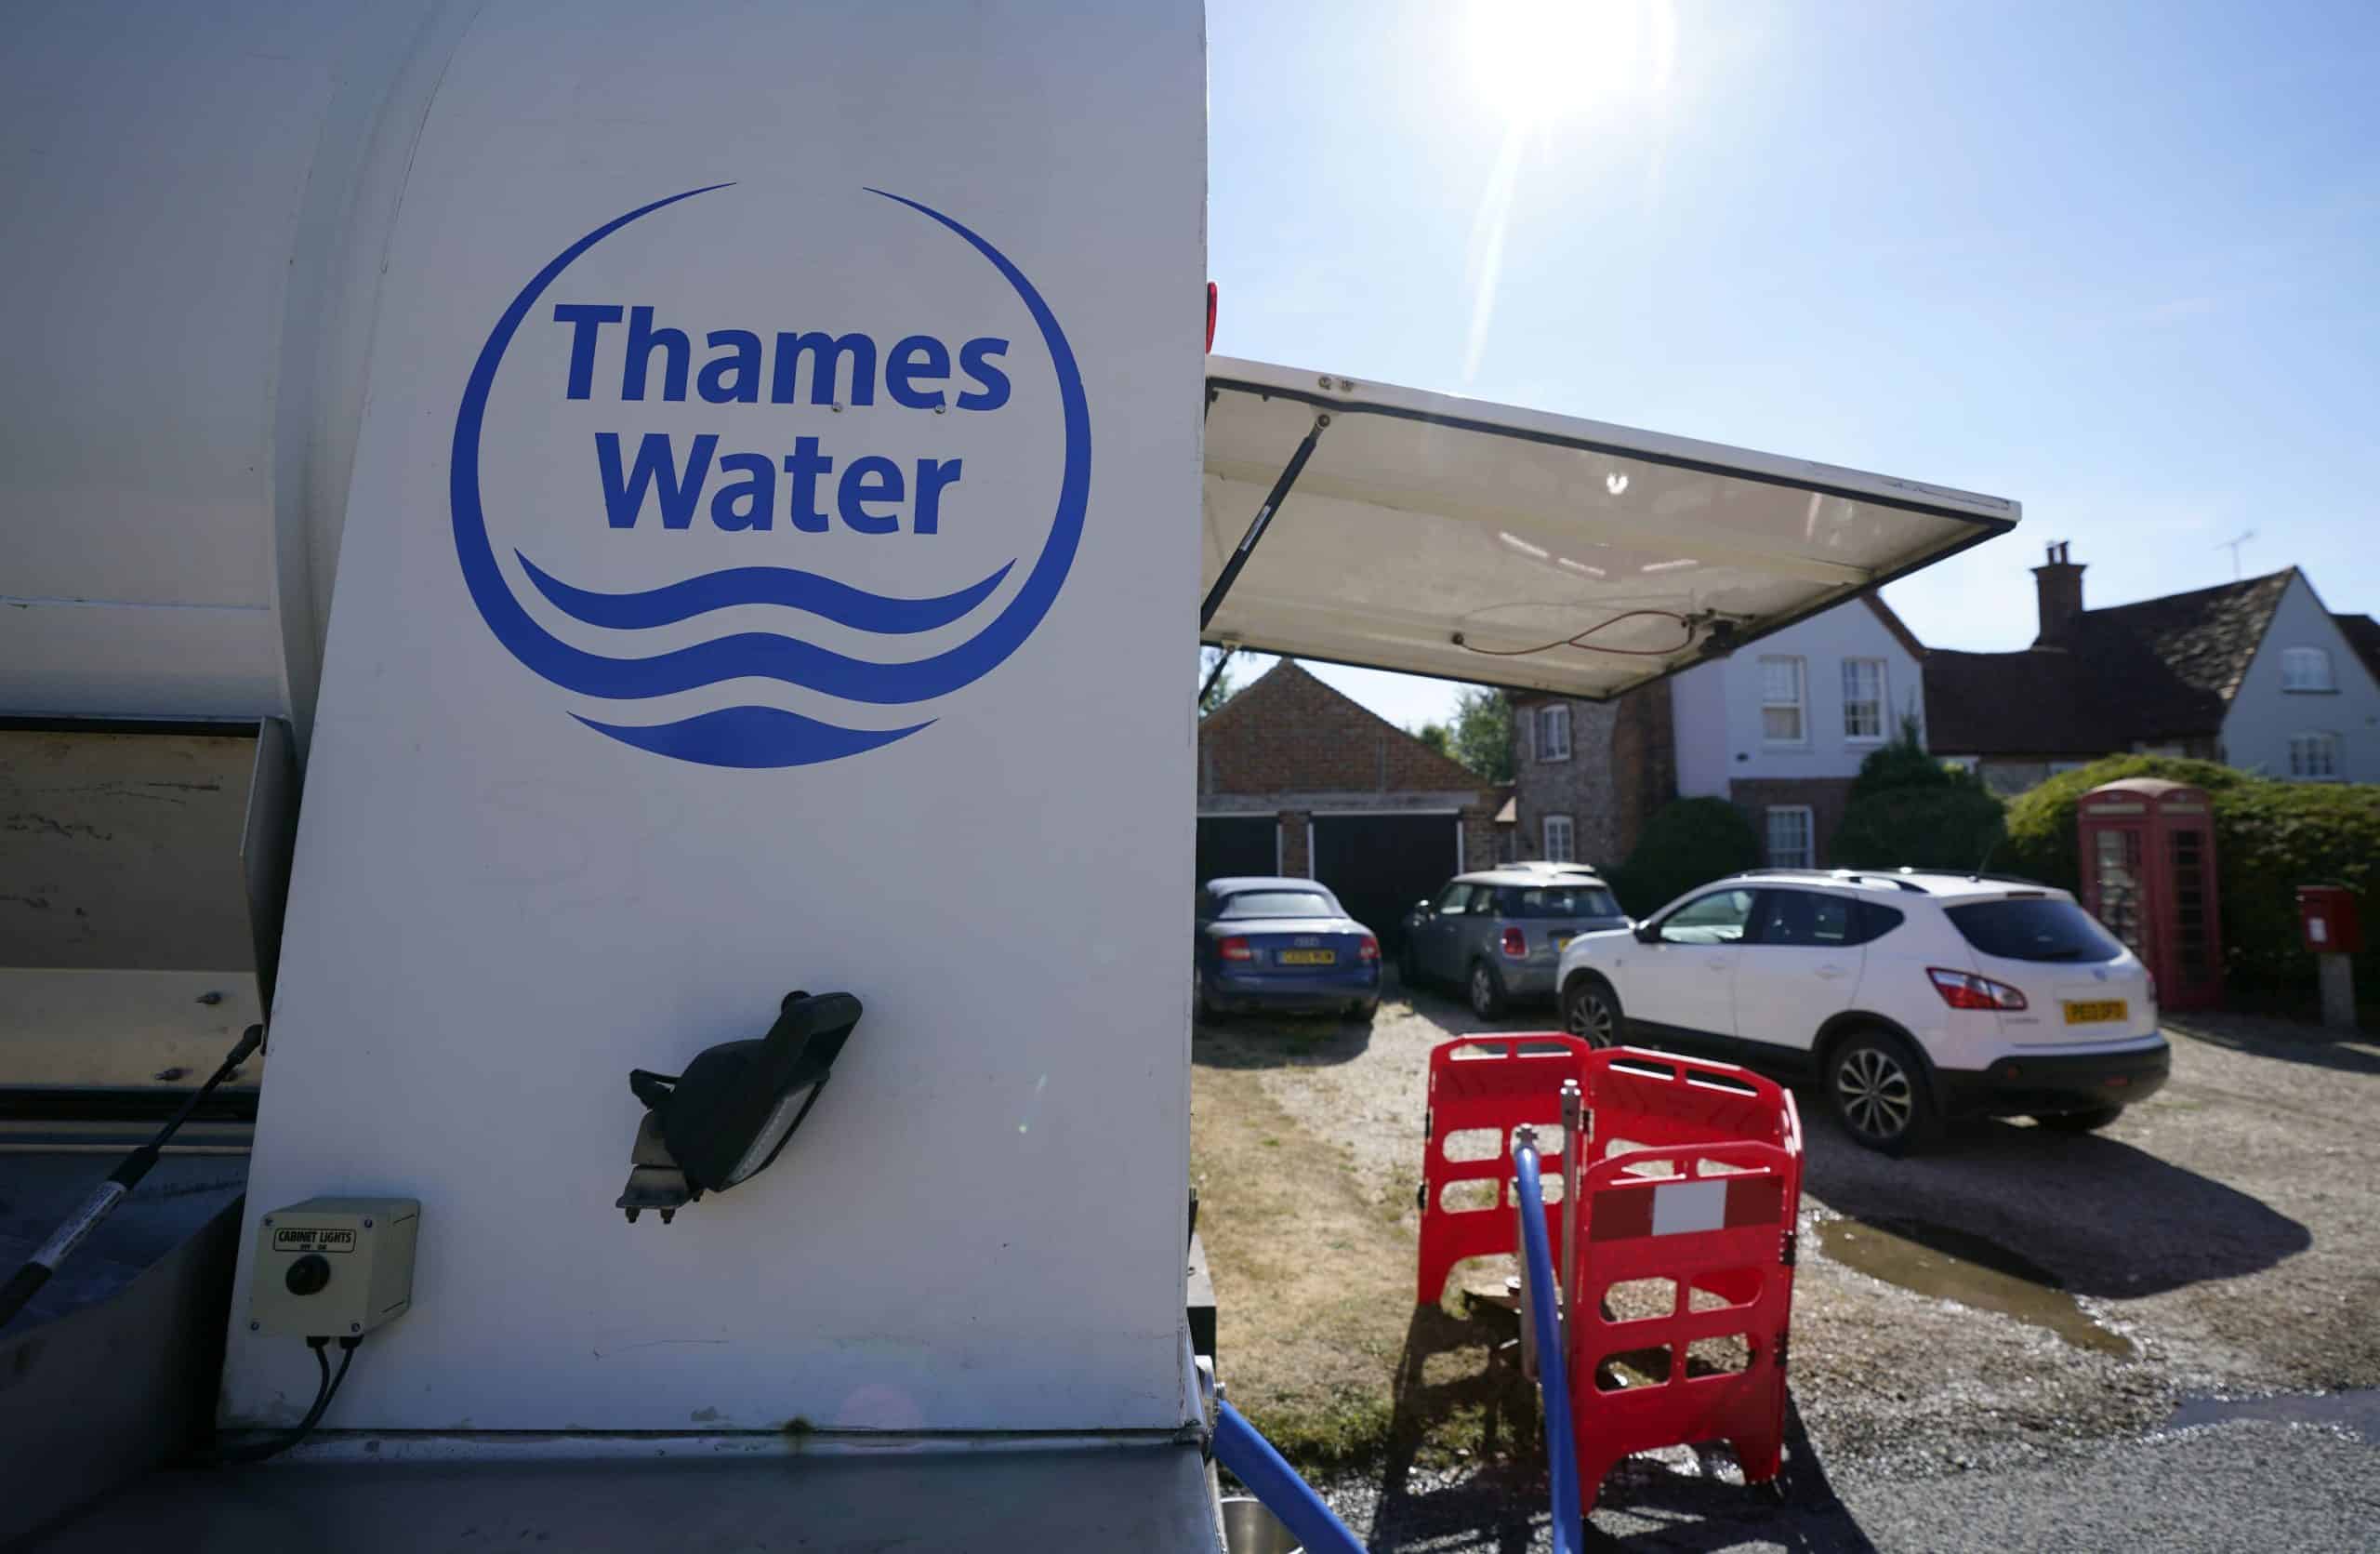 Preparations underway for Government takeover of Thames Water – reports